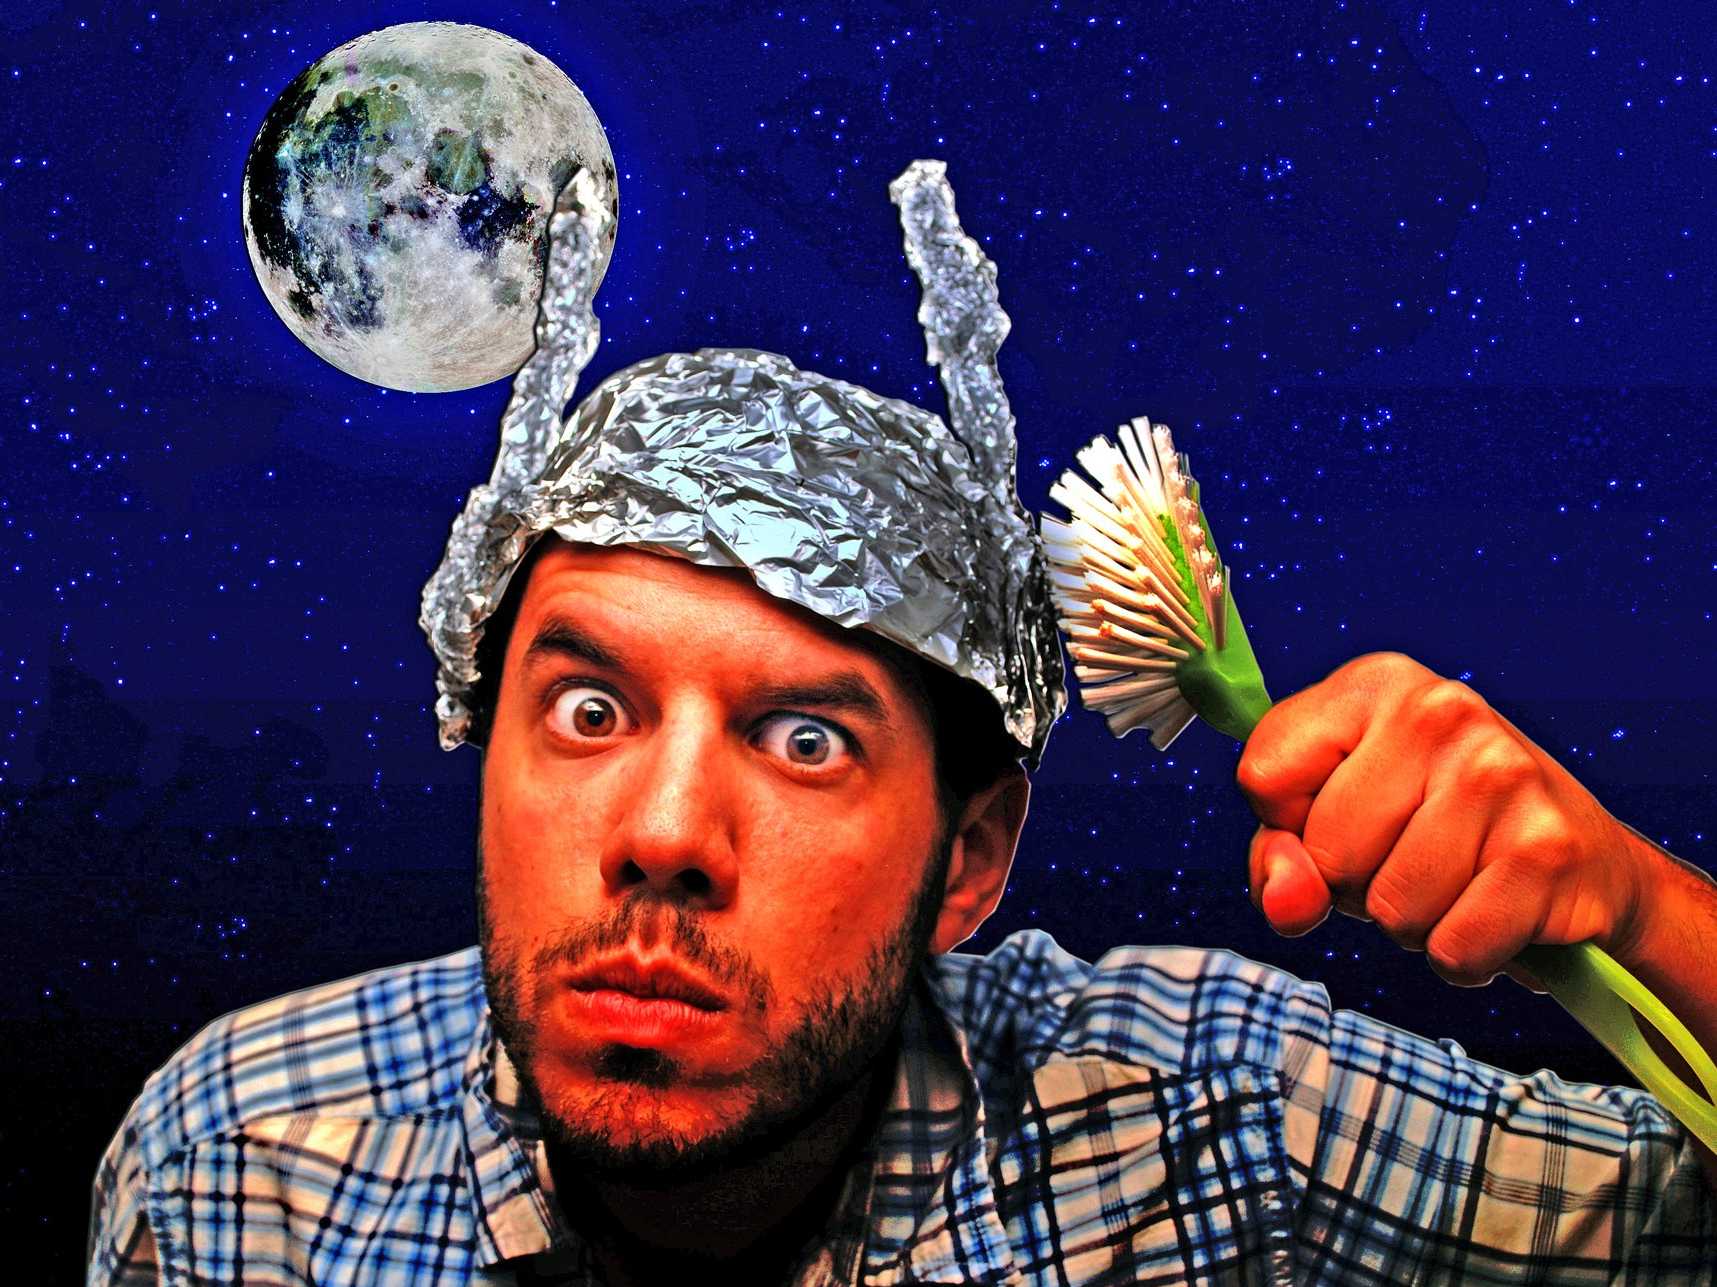 7 conspiracy theories that aren't actually conspiracy theories